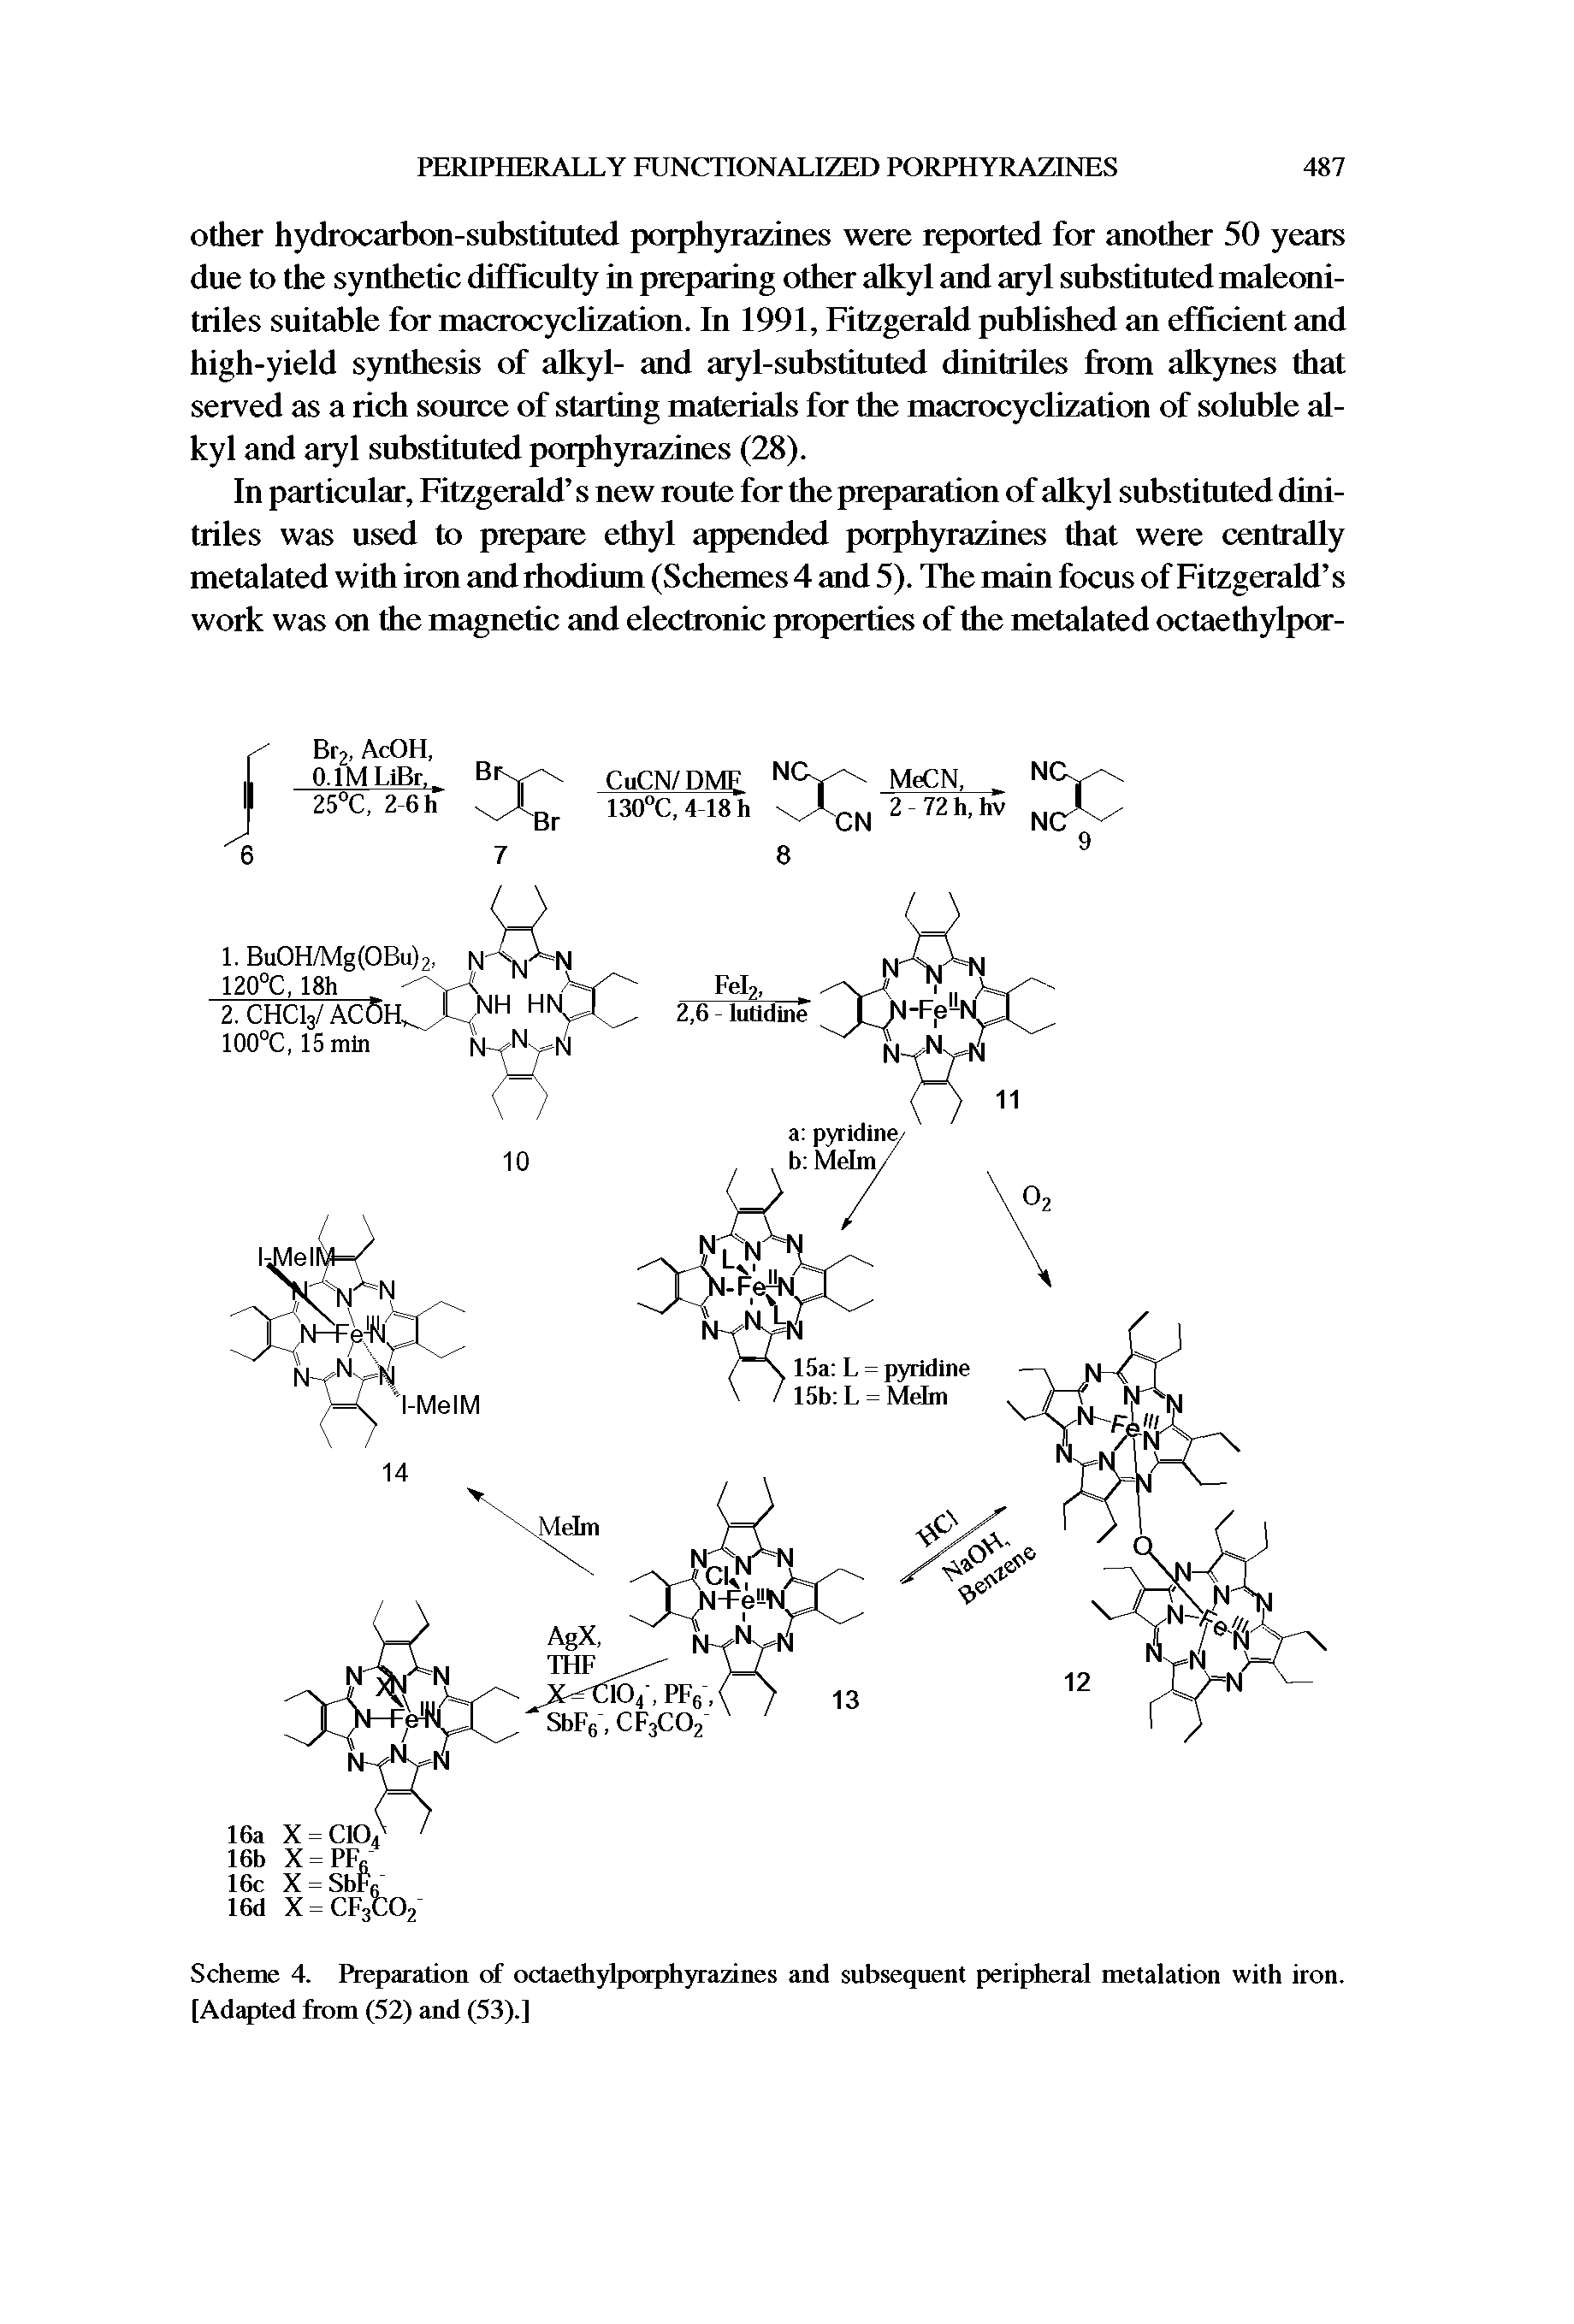 Scheme 4. Preparation of octaethylporphyrazines and subsequent peripheral metalation with iron. [Adapted from (52) and (53).]...